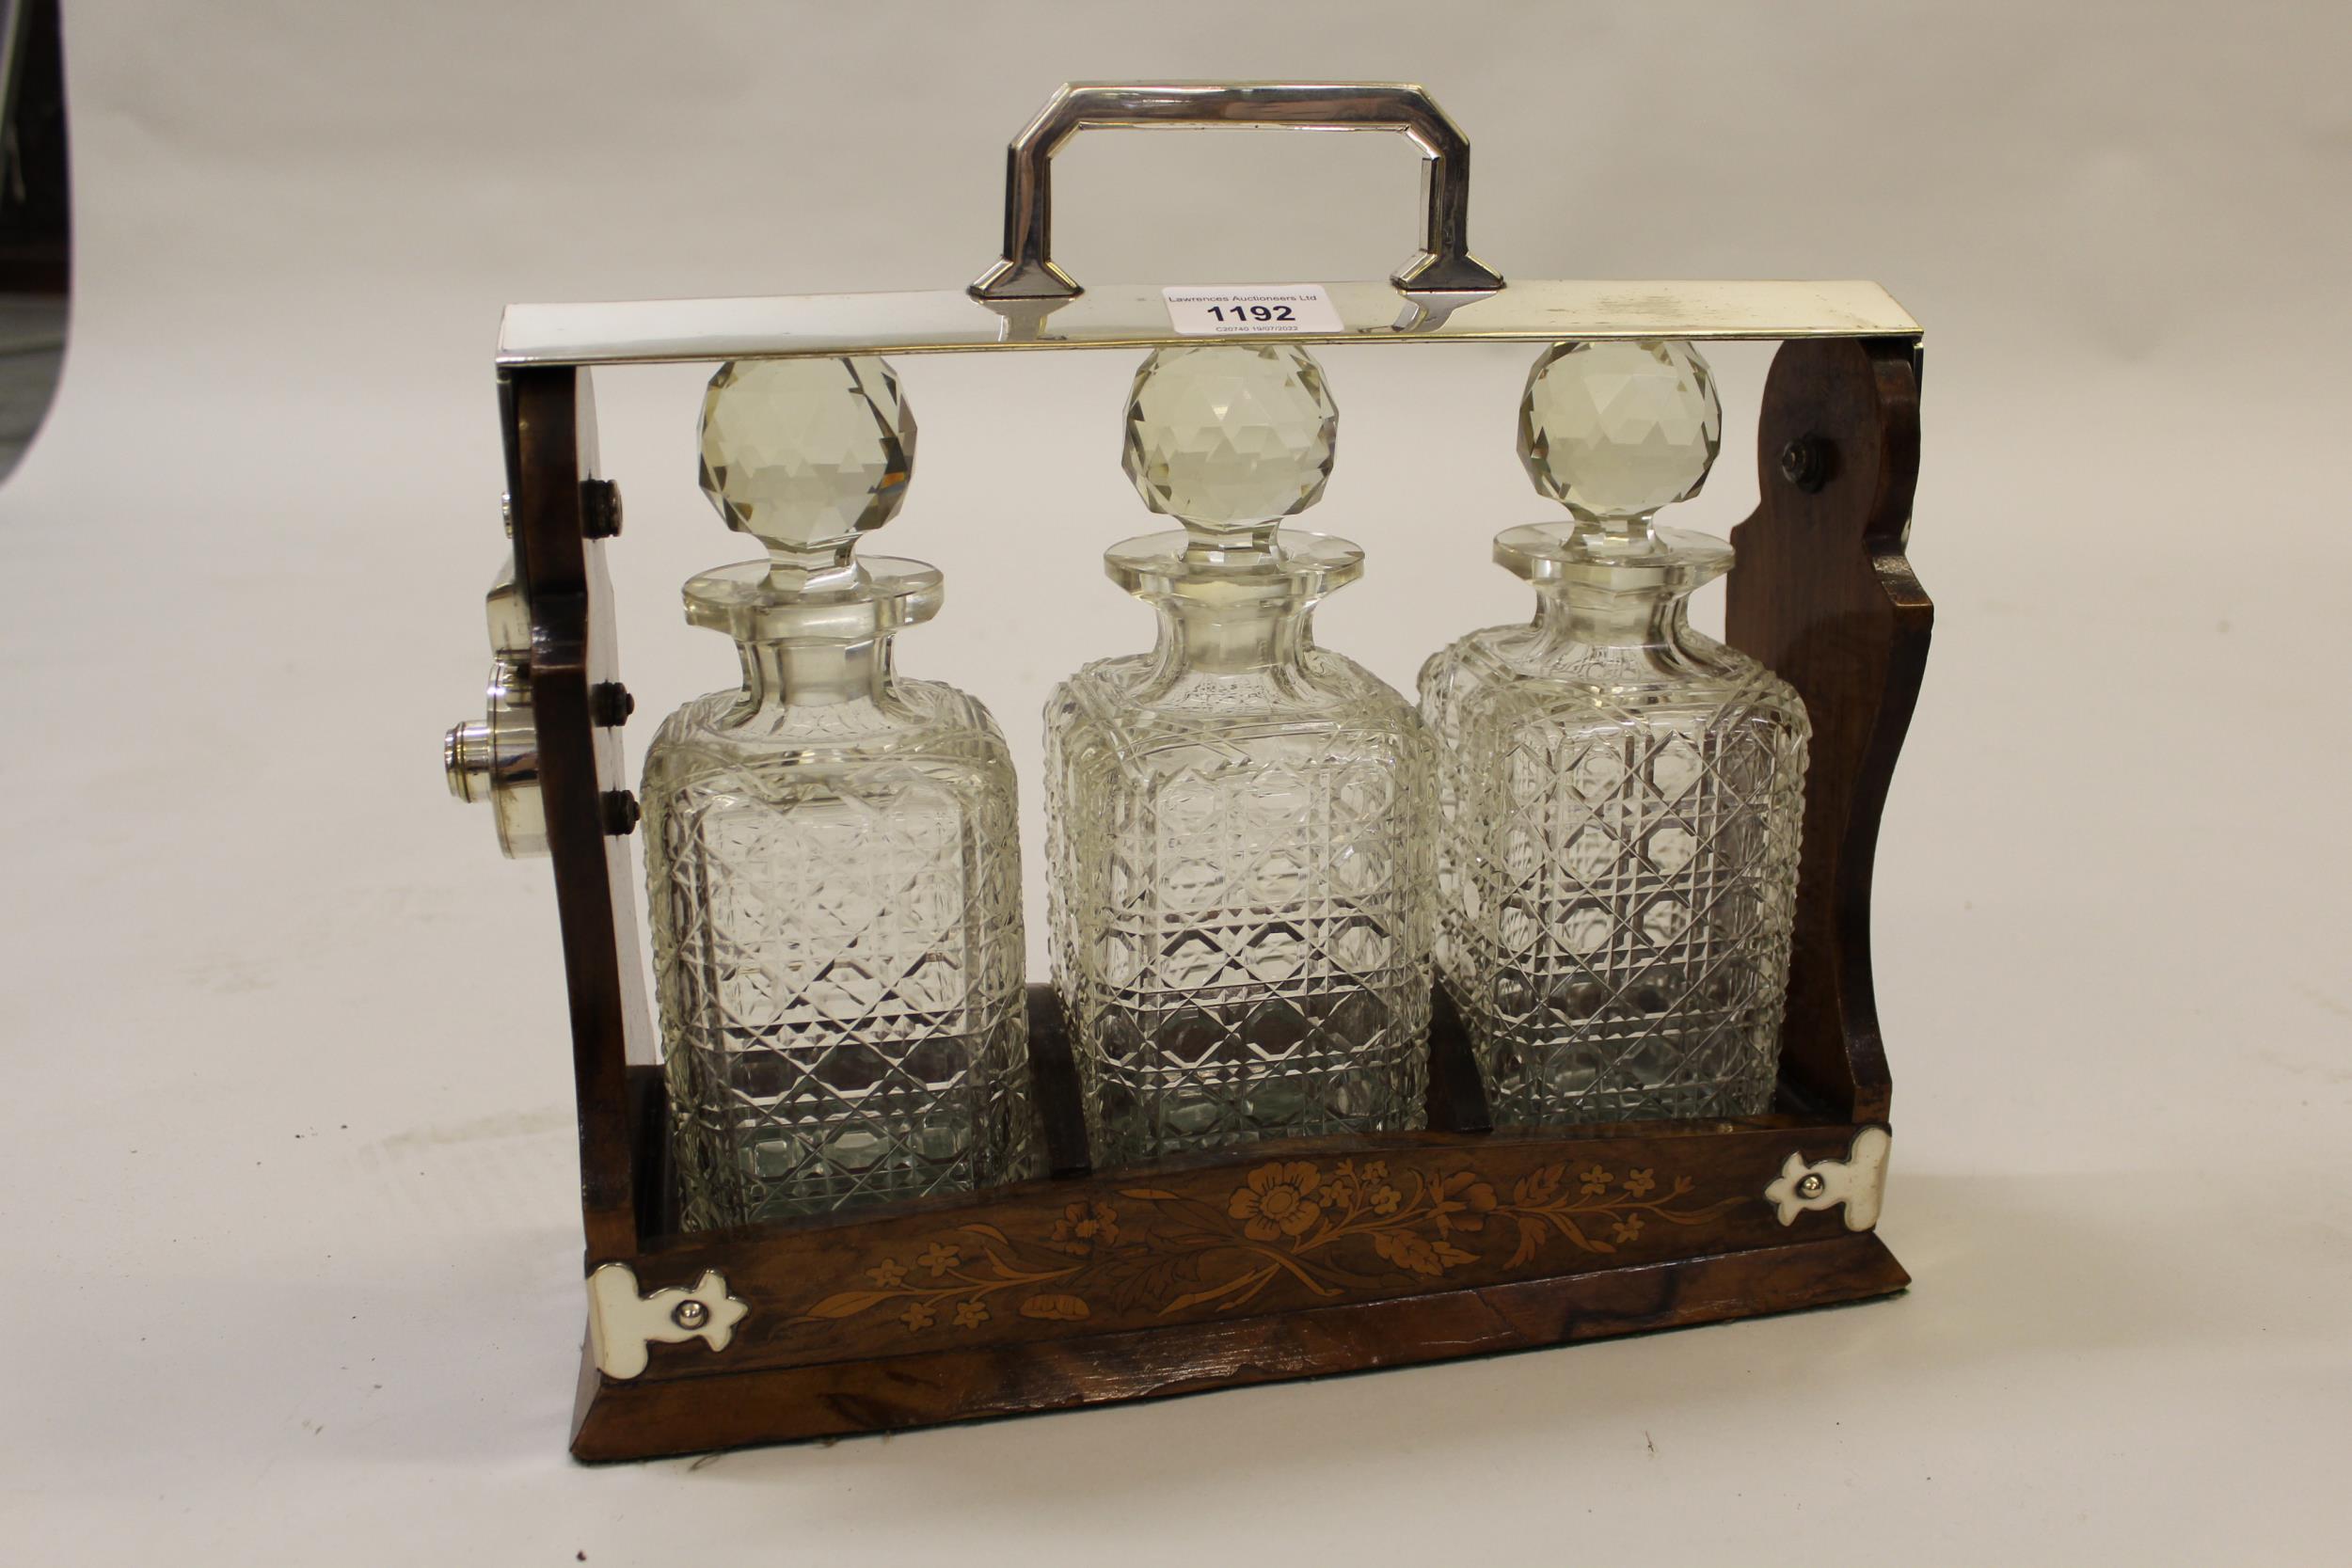 Late 19th / early 20th Century burr walnut floral inlaid and silver plate mounted three bottle